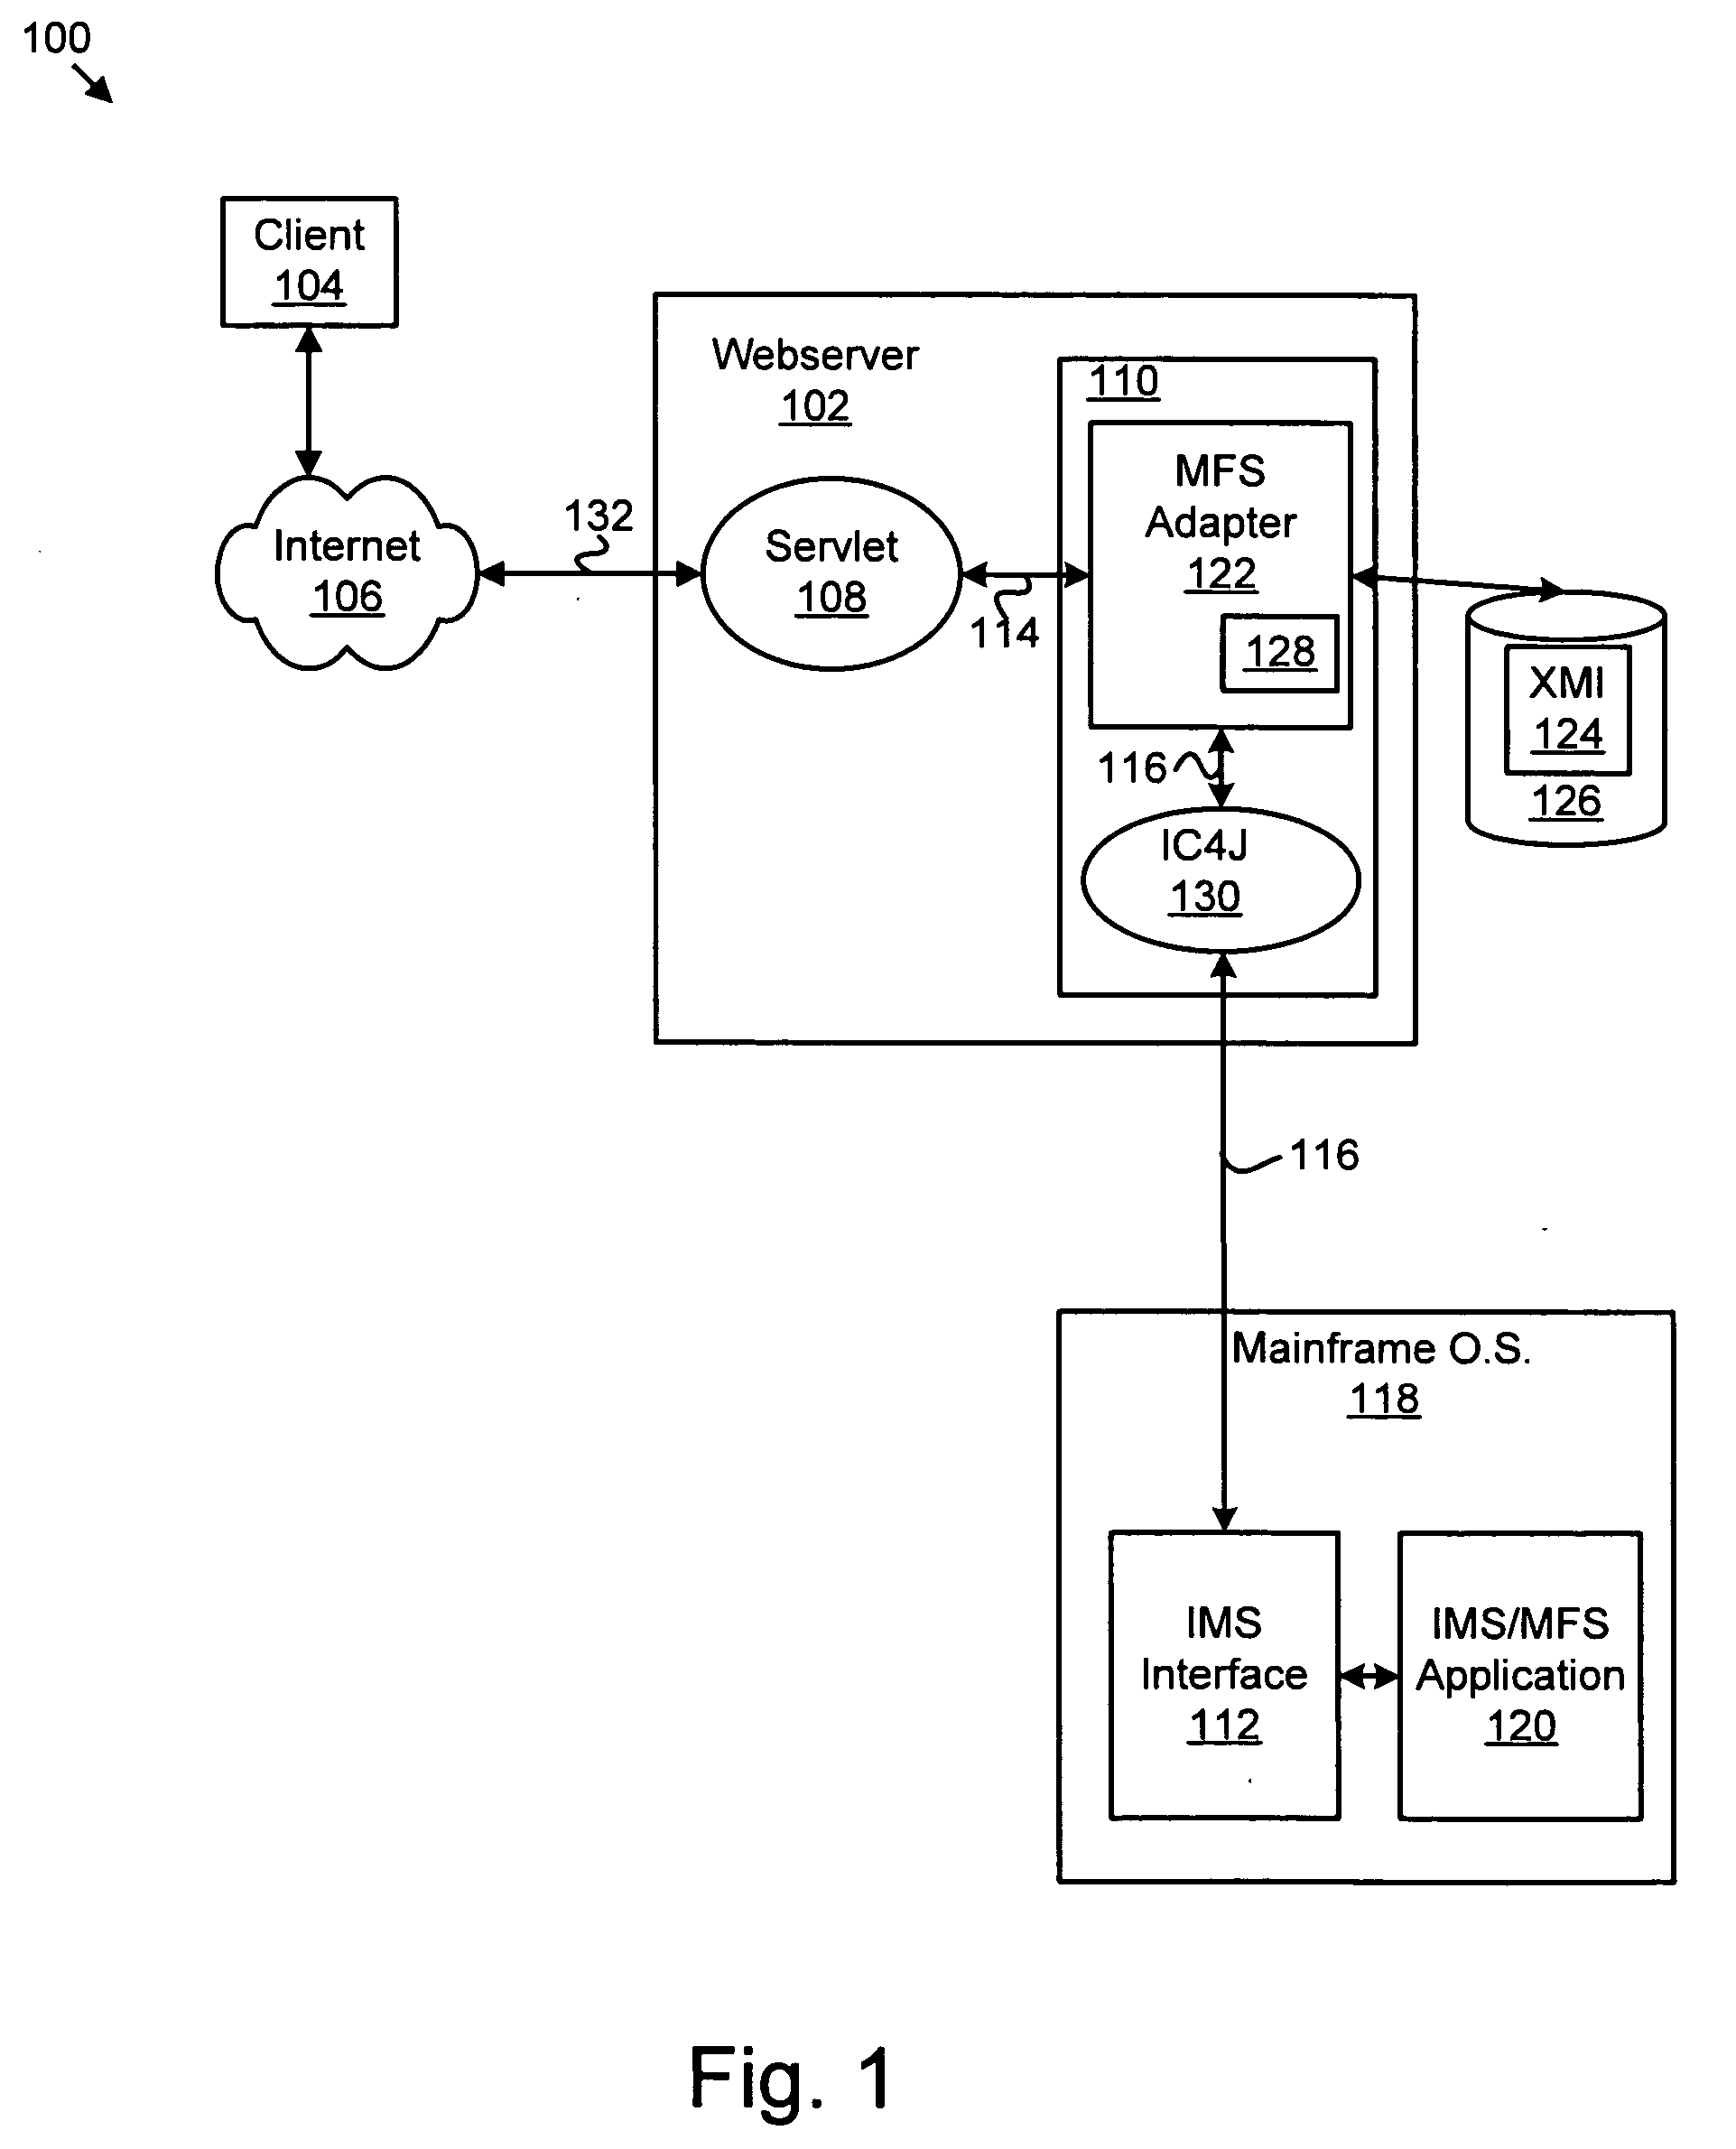 Apparatus, system, and method for facilitating transactions between thin-clients and message format service (MFS)-based information management system (IMS) applications